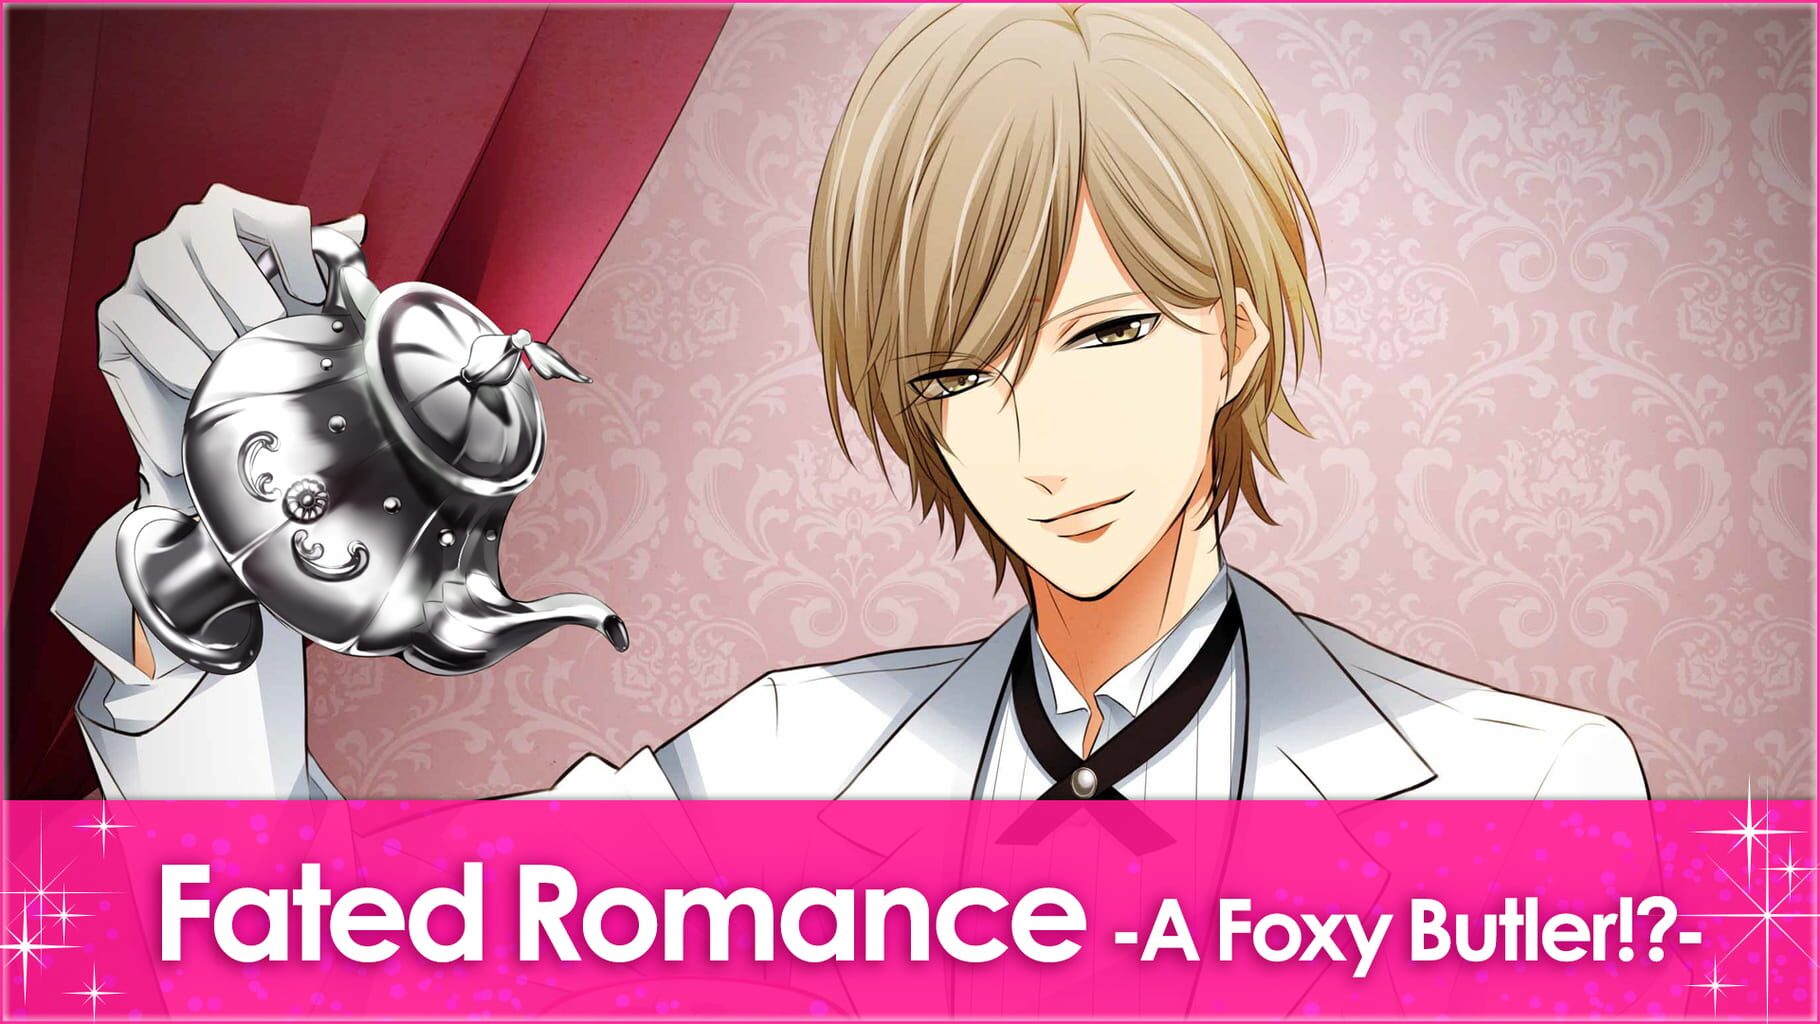 Enchanted in the Moonlight: Fated Romance - A Foxy Butler!? artwork